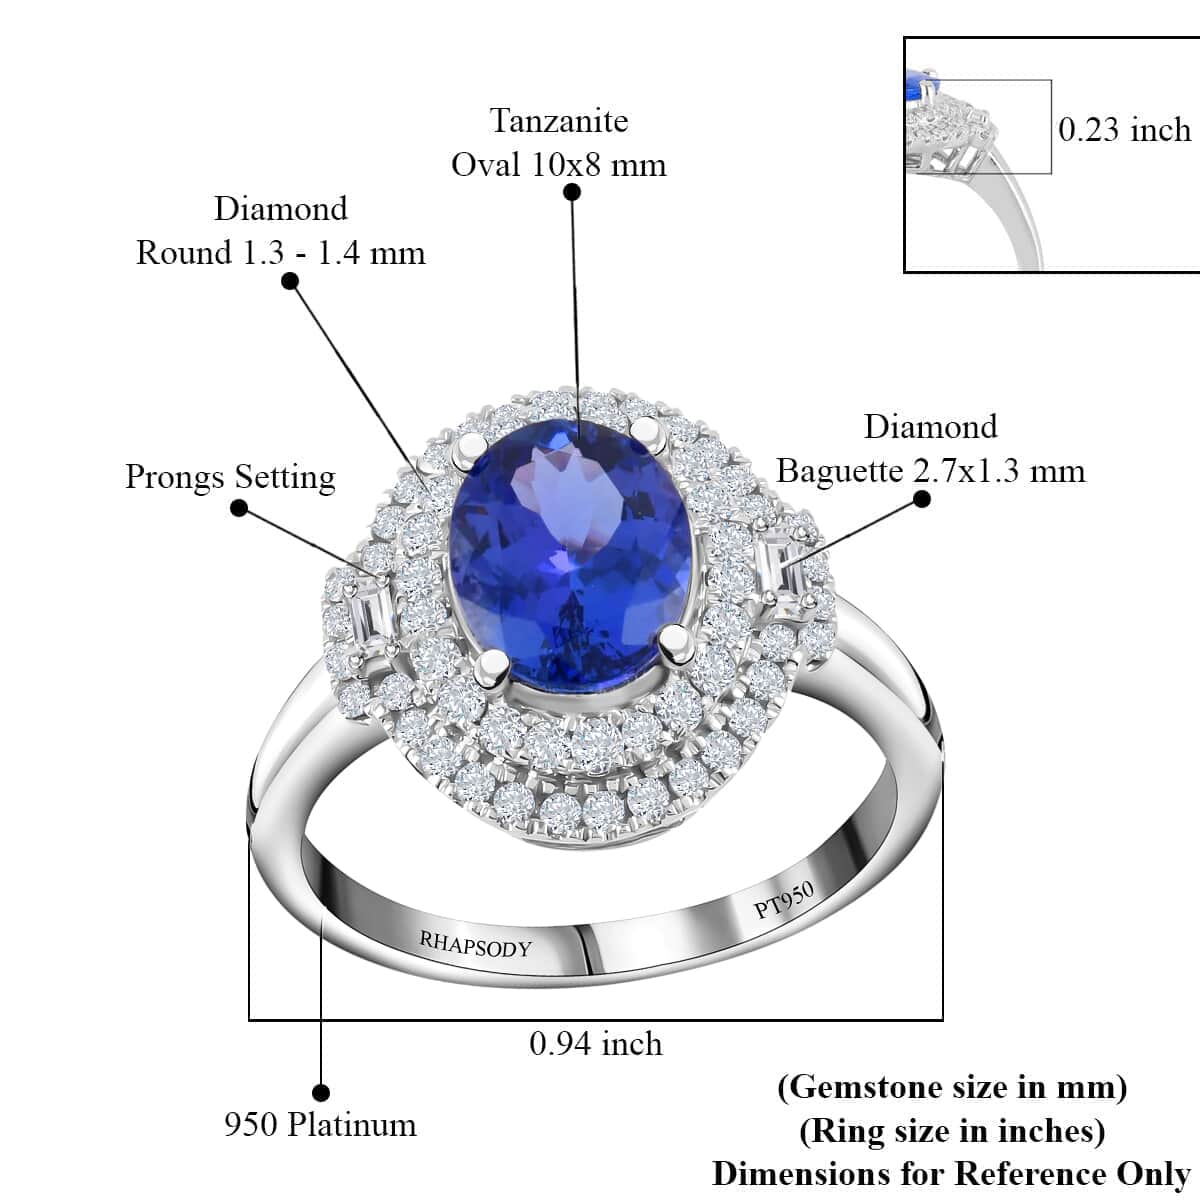 Rhapsody 3.70 ctw AAAA Tanzanite and Diamond E-F VS Double Halo Ring in 950 Platinum (Size 10.0) 8 Grams image number 4